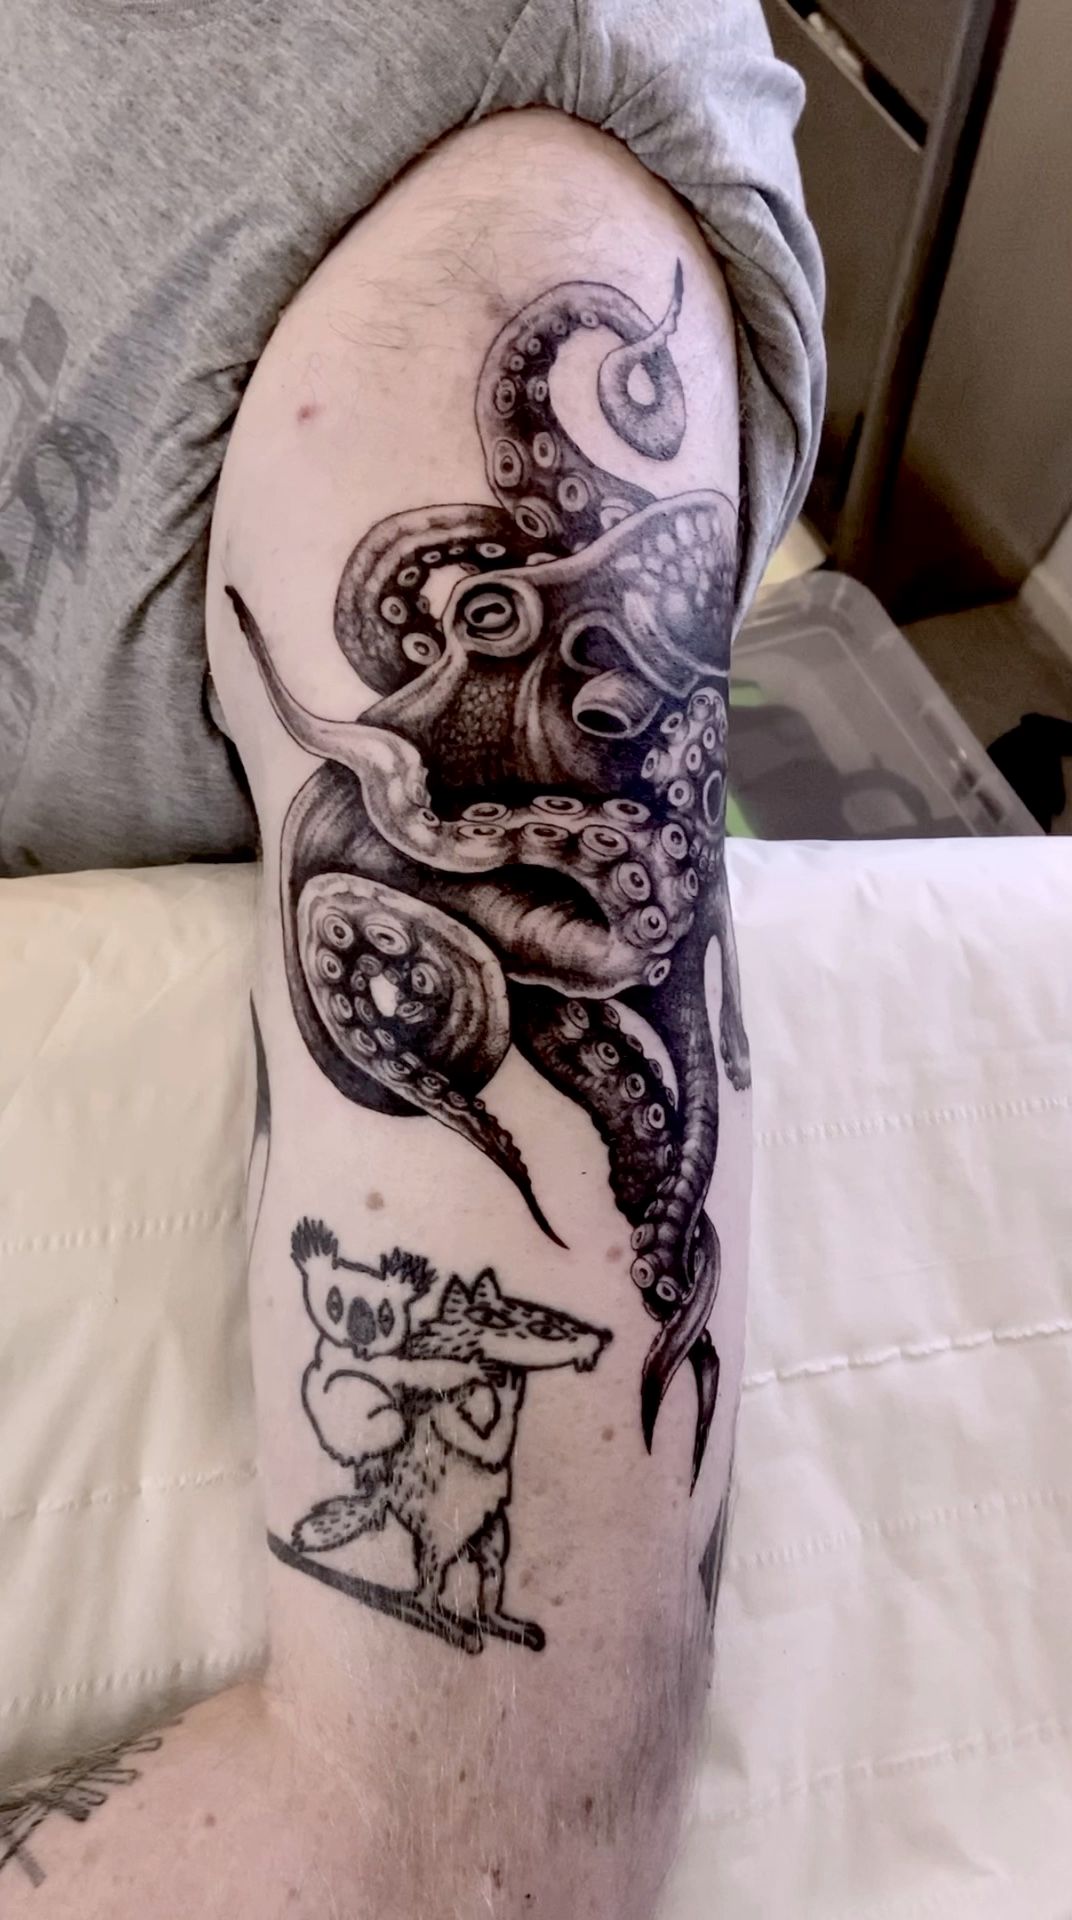 First tattoo Kraken attacking a ship on my calf Done by Lee at Tortuga  Tattoo UK  rtattoos